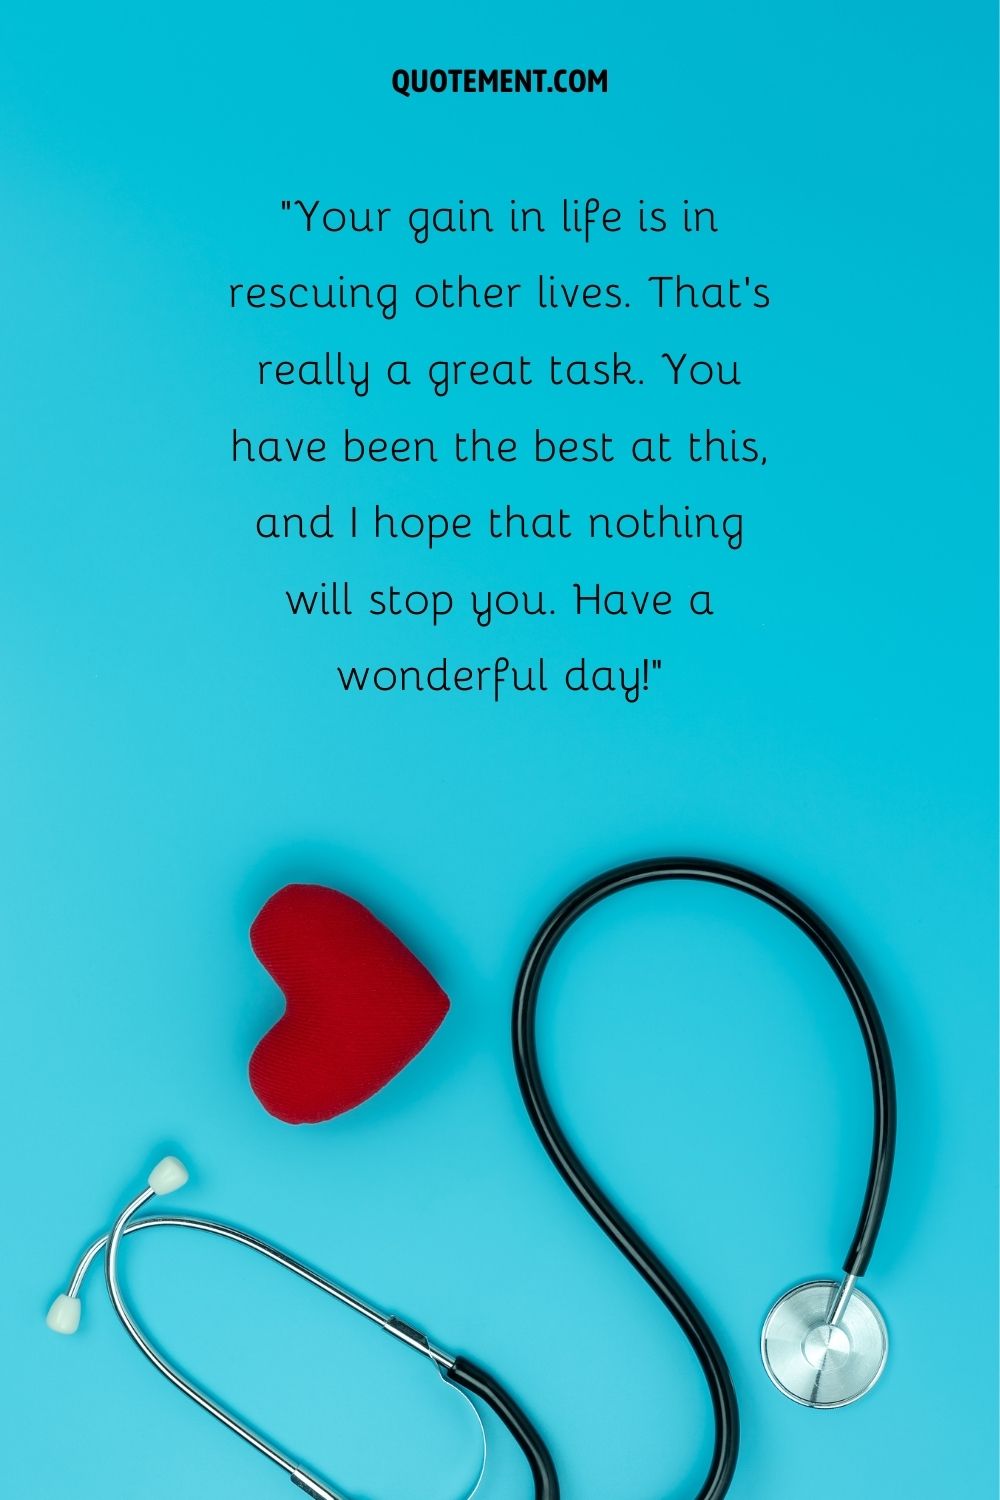 stethoscope and a heart emoji on a blue background representing doctor birthday wish